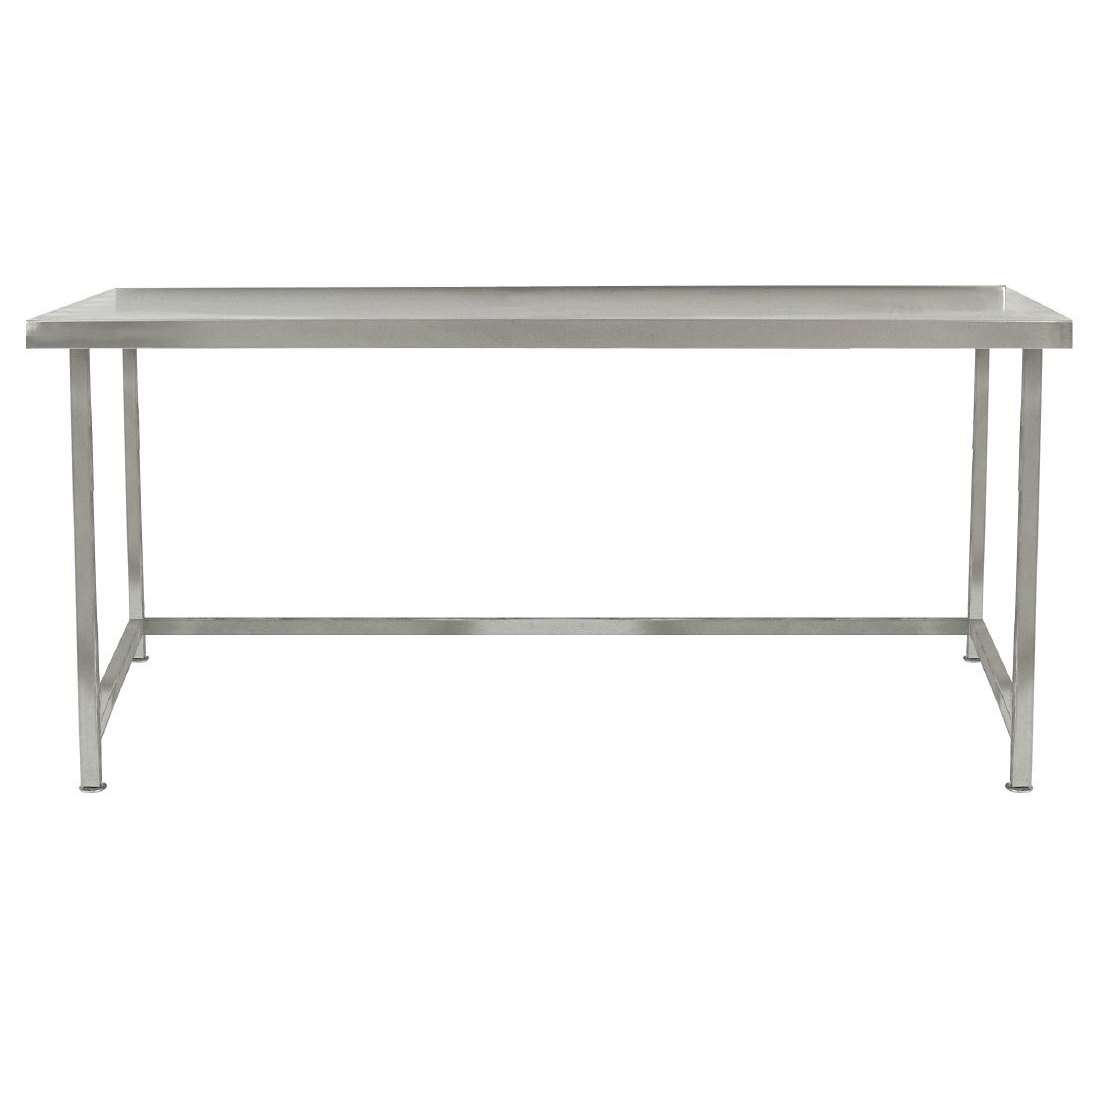 Parry Fully Welded Stainless Steel Centre Table 900x600mm